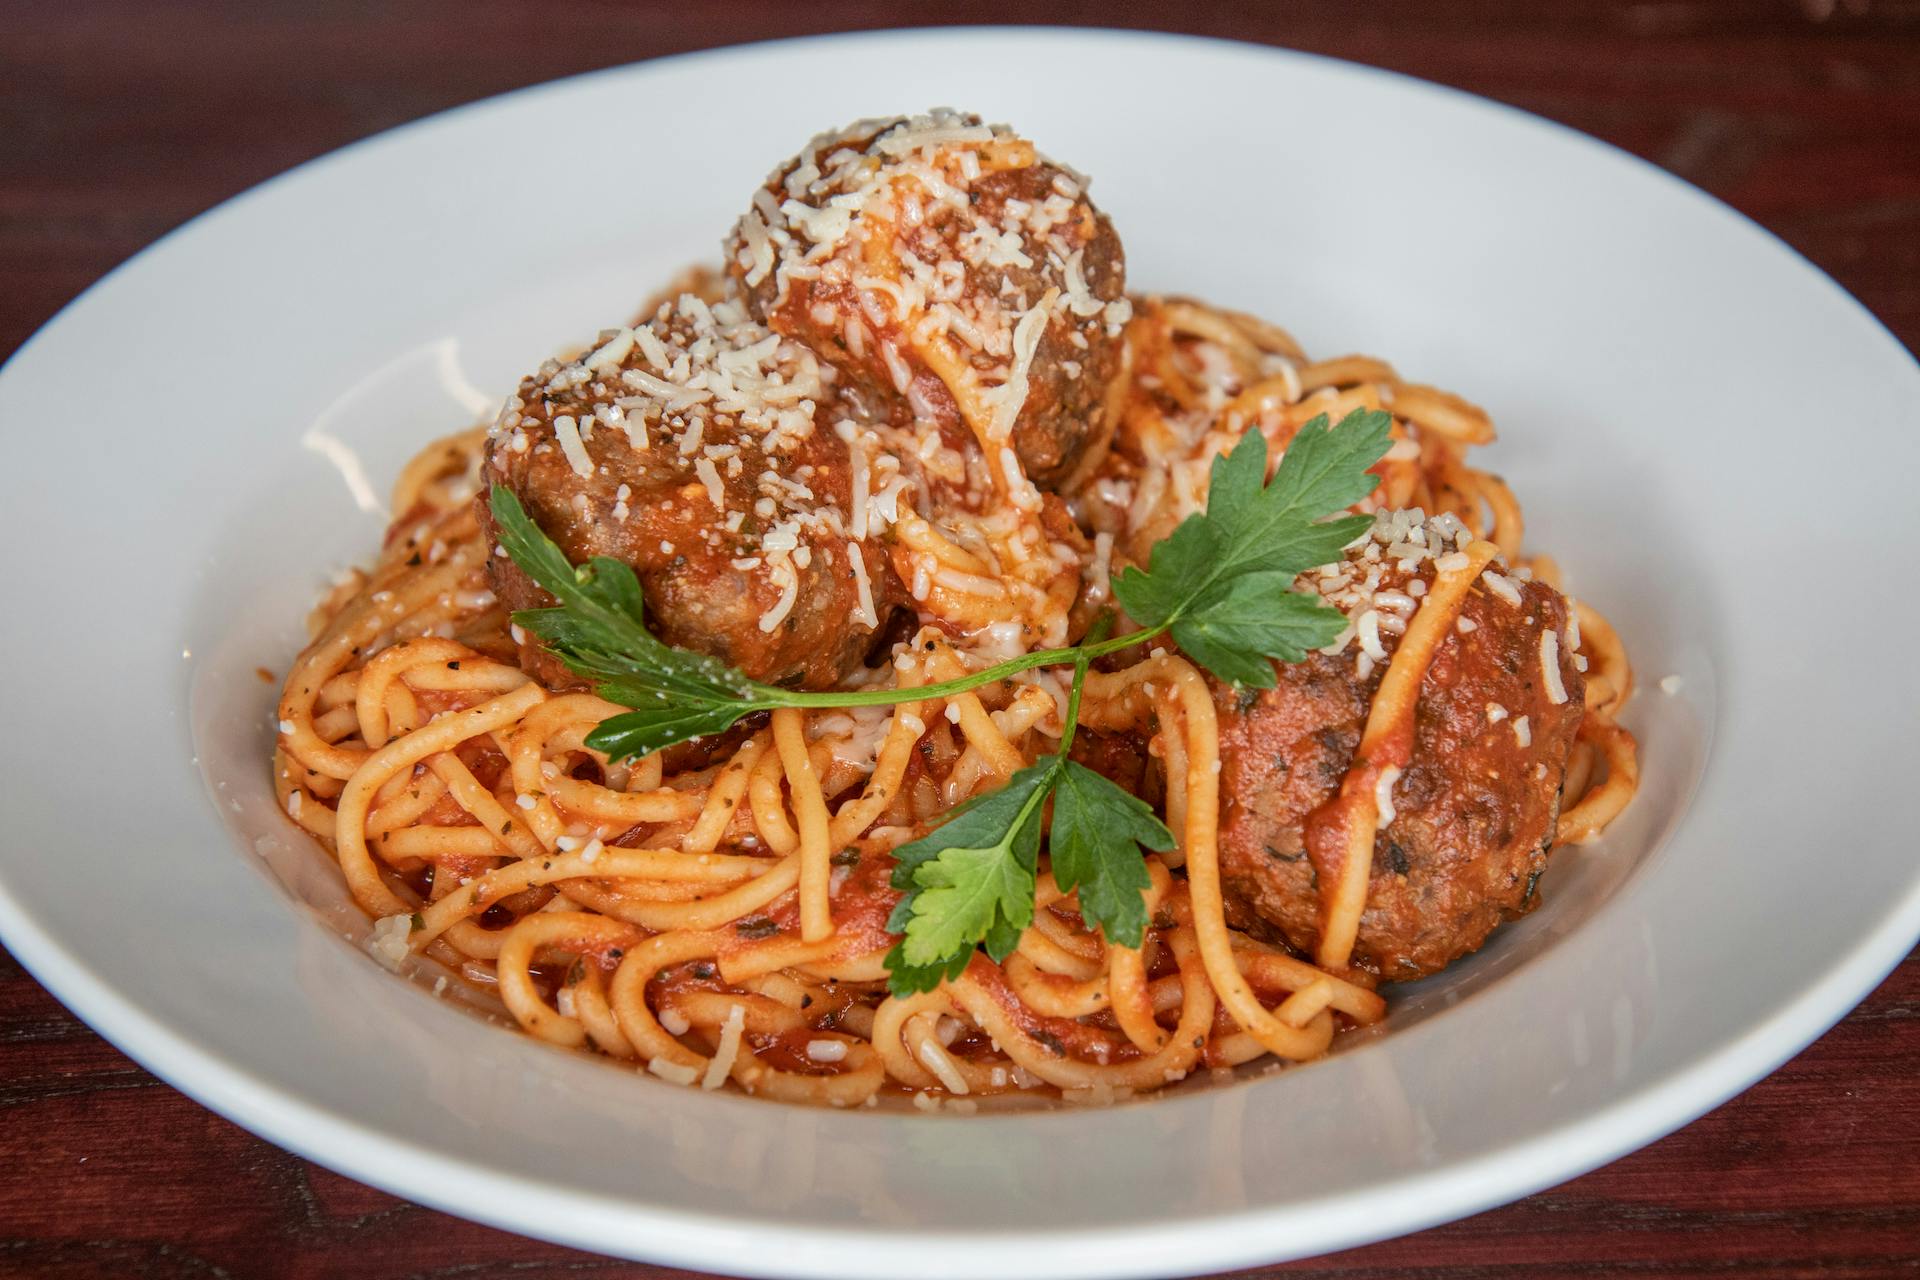 Spaghetti & Meatball from Firehouse Grill - Chicago Ave in Evanston, IL